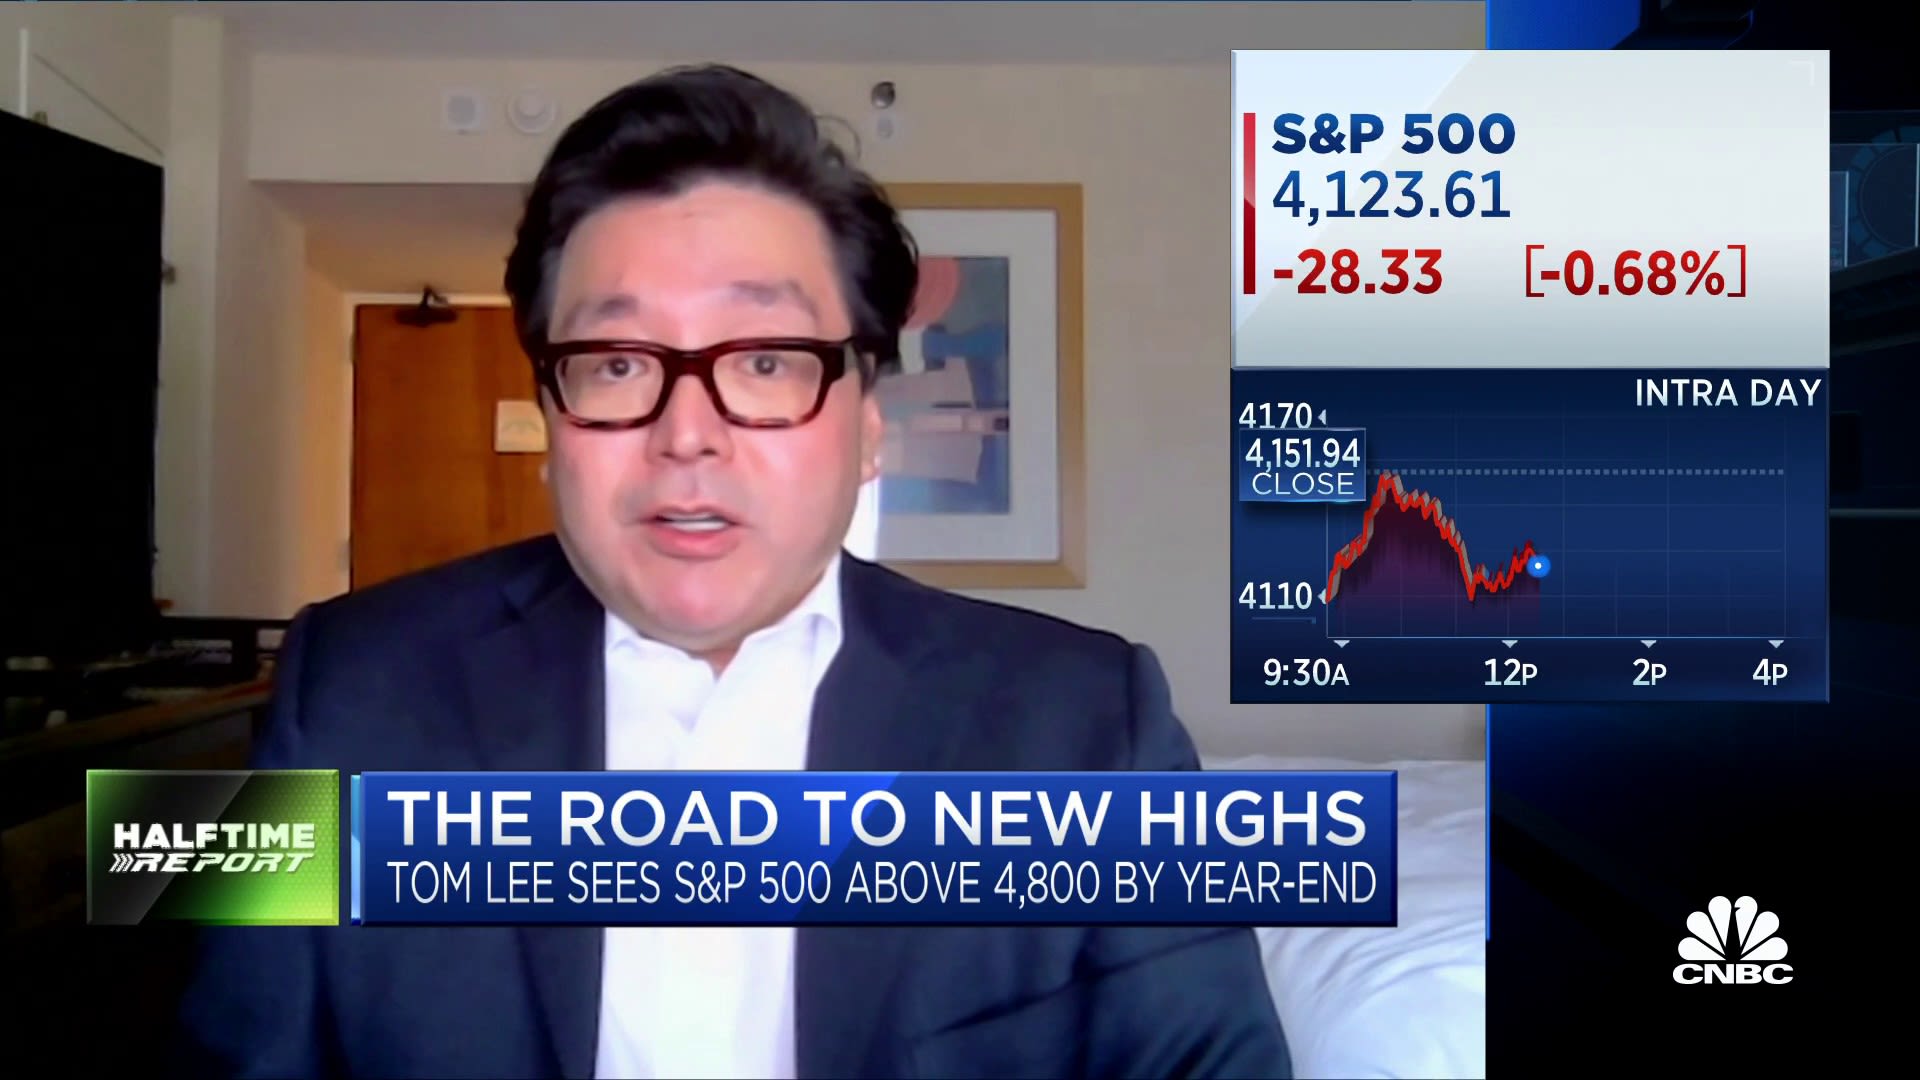 Fundstrat's Tom Lee makes his case for S&P to reach 4,800 by year end